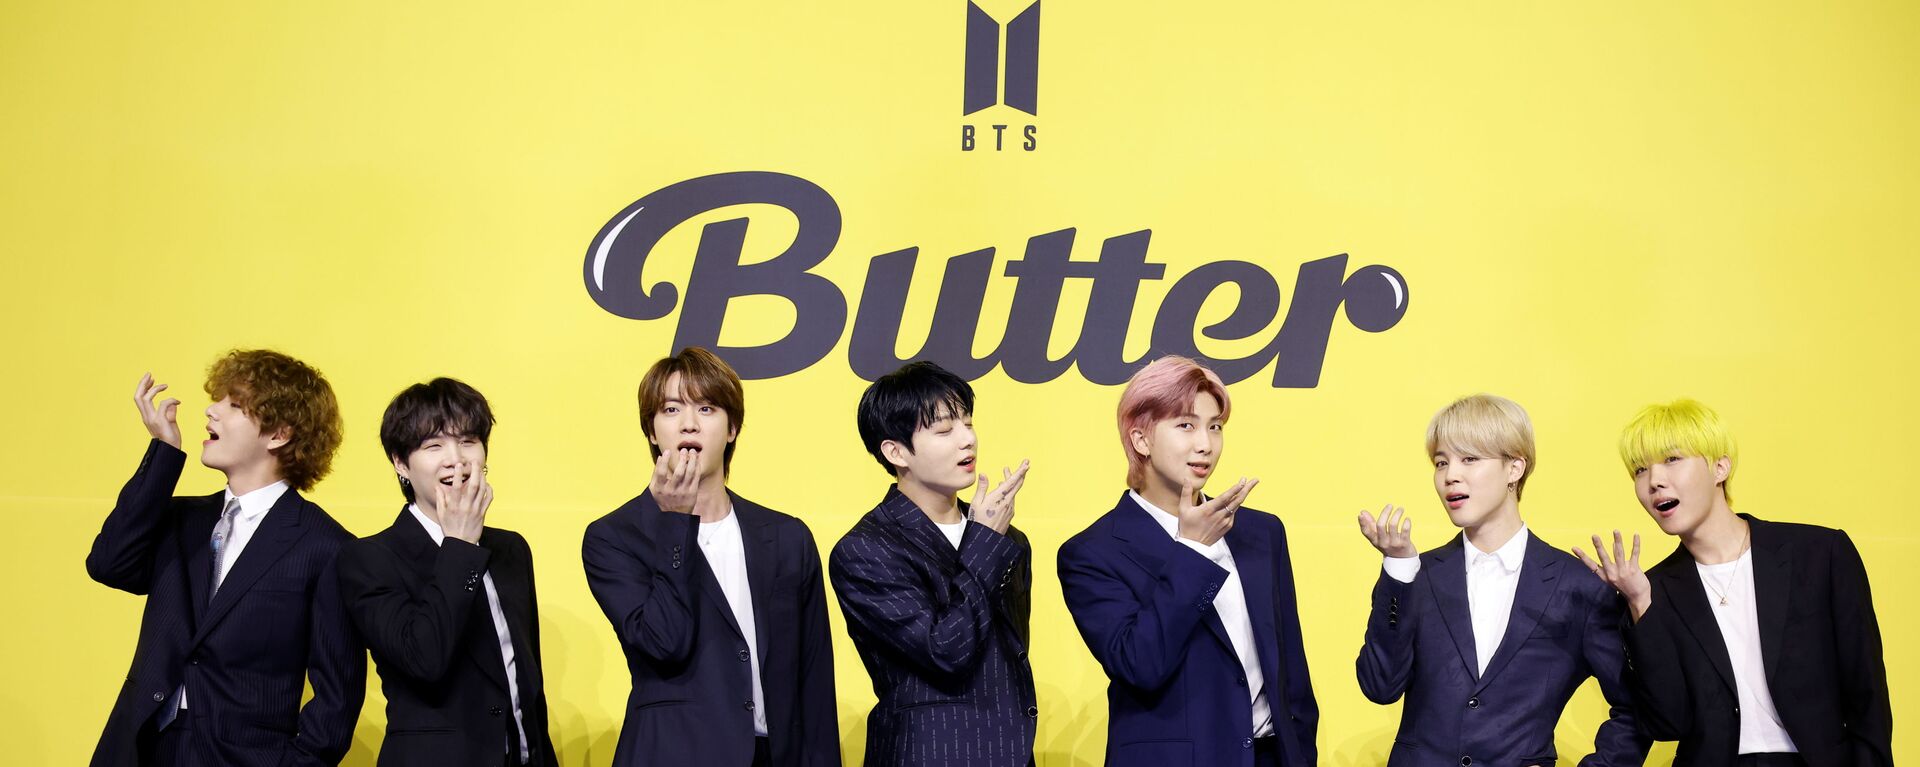 Members of K-pop boy band BTS pose for photographs during a photo opportunity promoting their new single 'Butter' in Seoul - Sputnik International, 1920, 09.12.2021